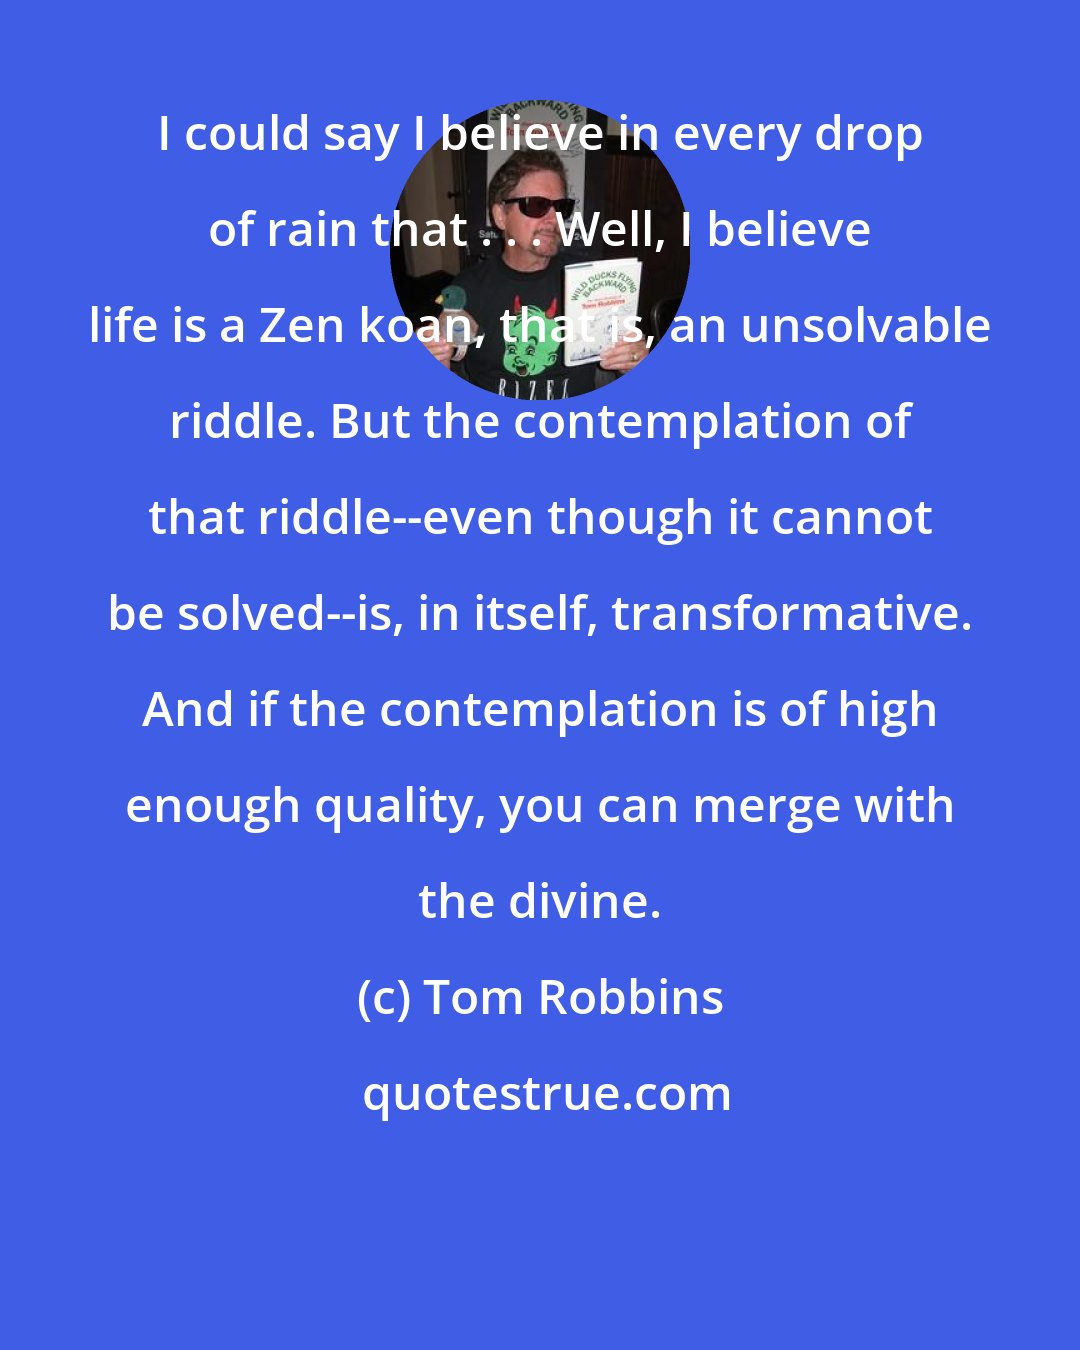 Tom Robbins: I could say I believe in every drop of rain that . . . Well, I believe life is a Zen koan, that is, an unsolvable riddle. But the contemplation of that riddle--even though it cannot be solved--is, in itself, transformative. And if the contemplation is of high enough quality, you can merge with the divine.